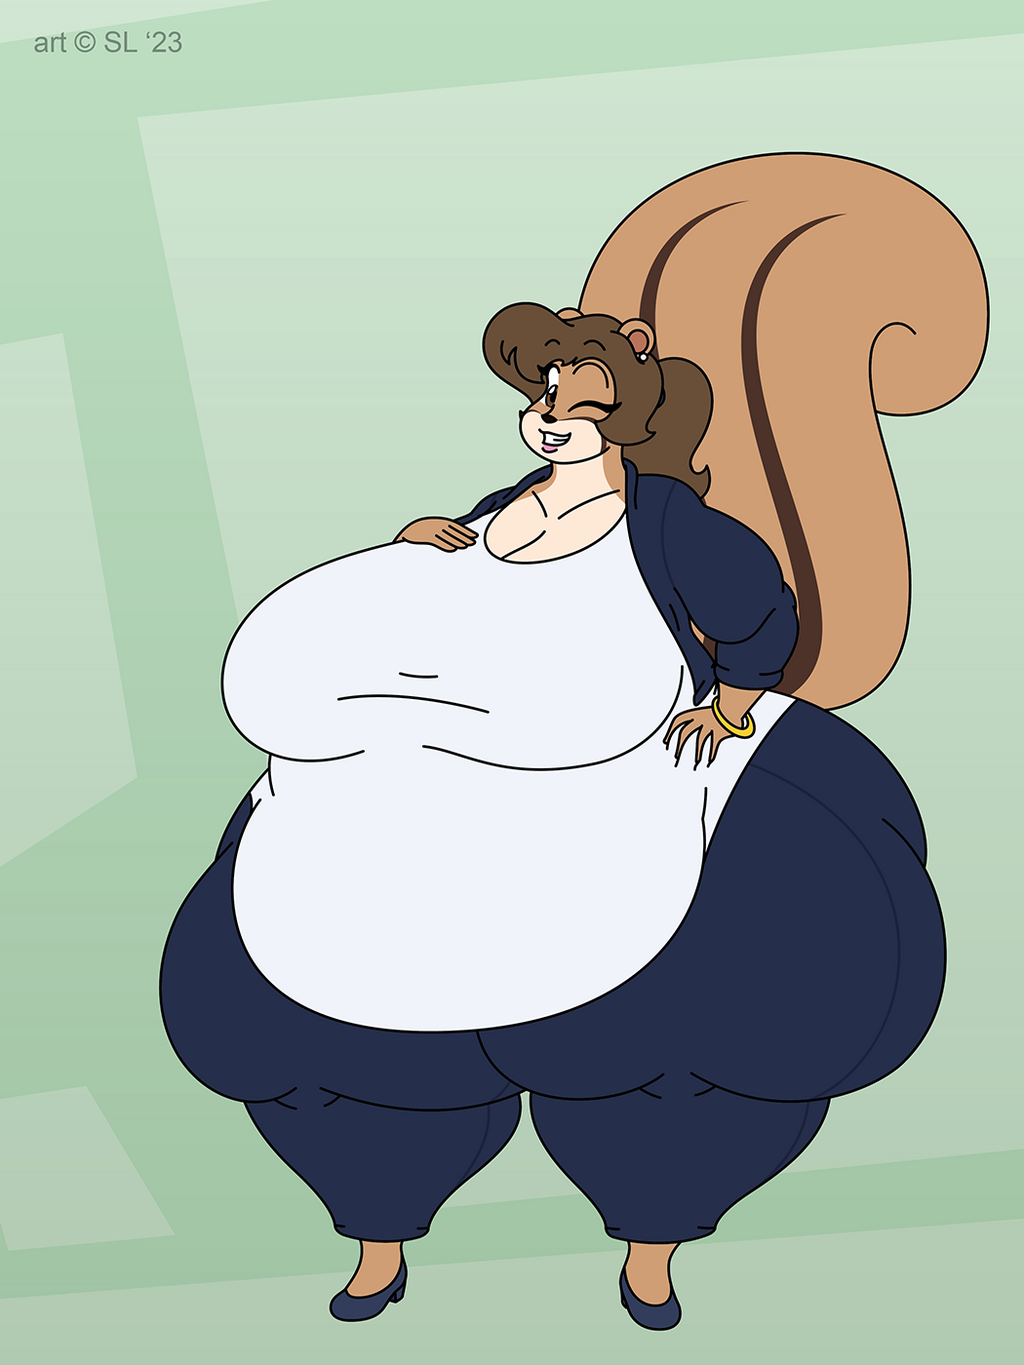 Most recent image: Terry Mosby: Business Chonky?